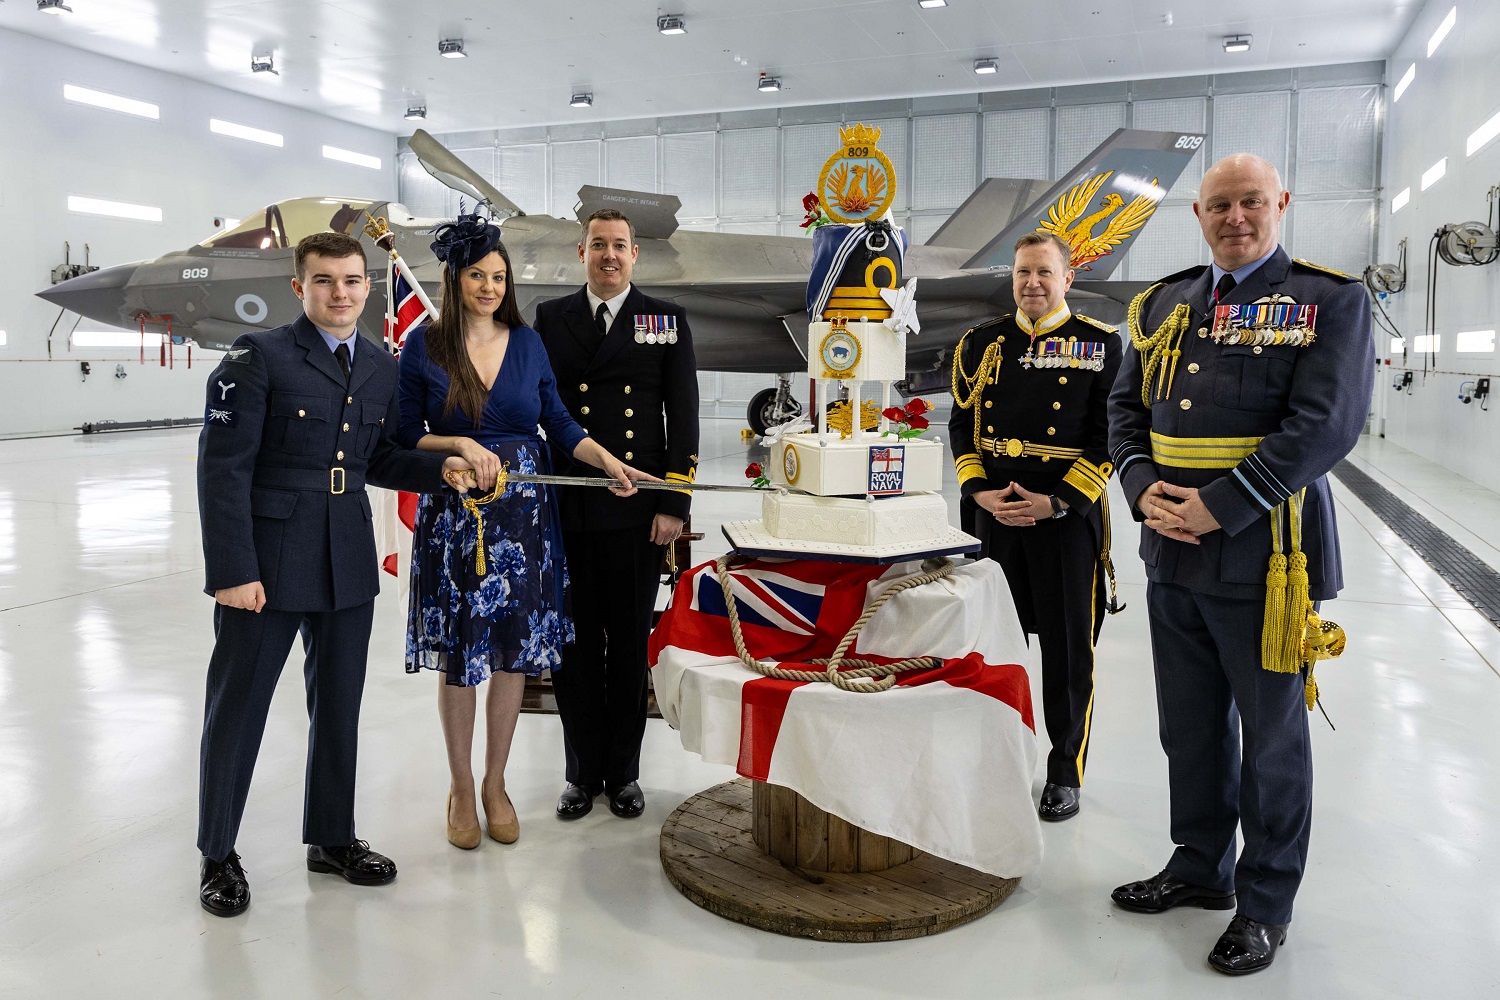 A cake produced especially for the 809 Naval Air Squadron Recommissioning Ceremony is cut by the newest member of the Squadron and the wife of Commander Nick Smith, as Commander Smith, Vice Admiral Martin Connell and Air Marshal Harvey Smith watch on.